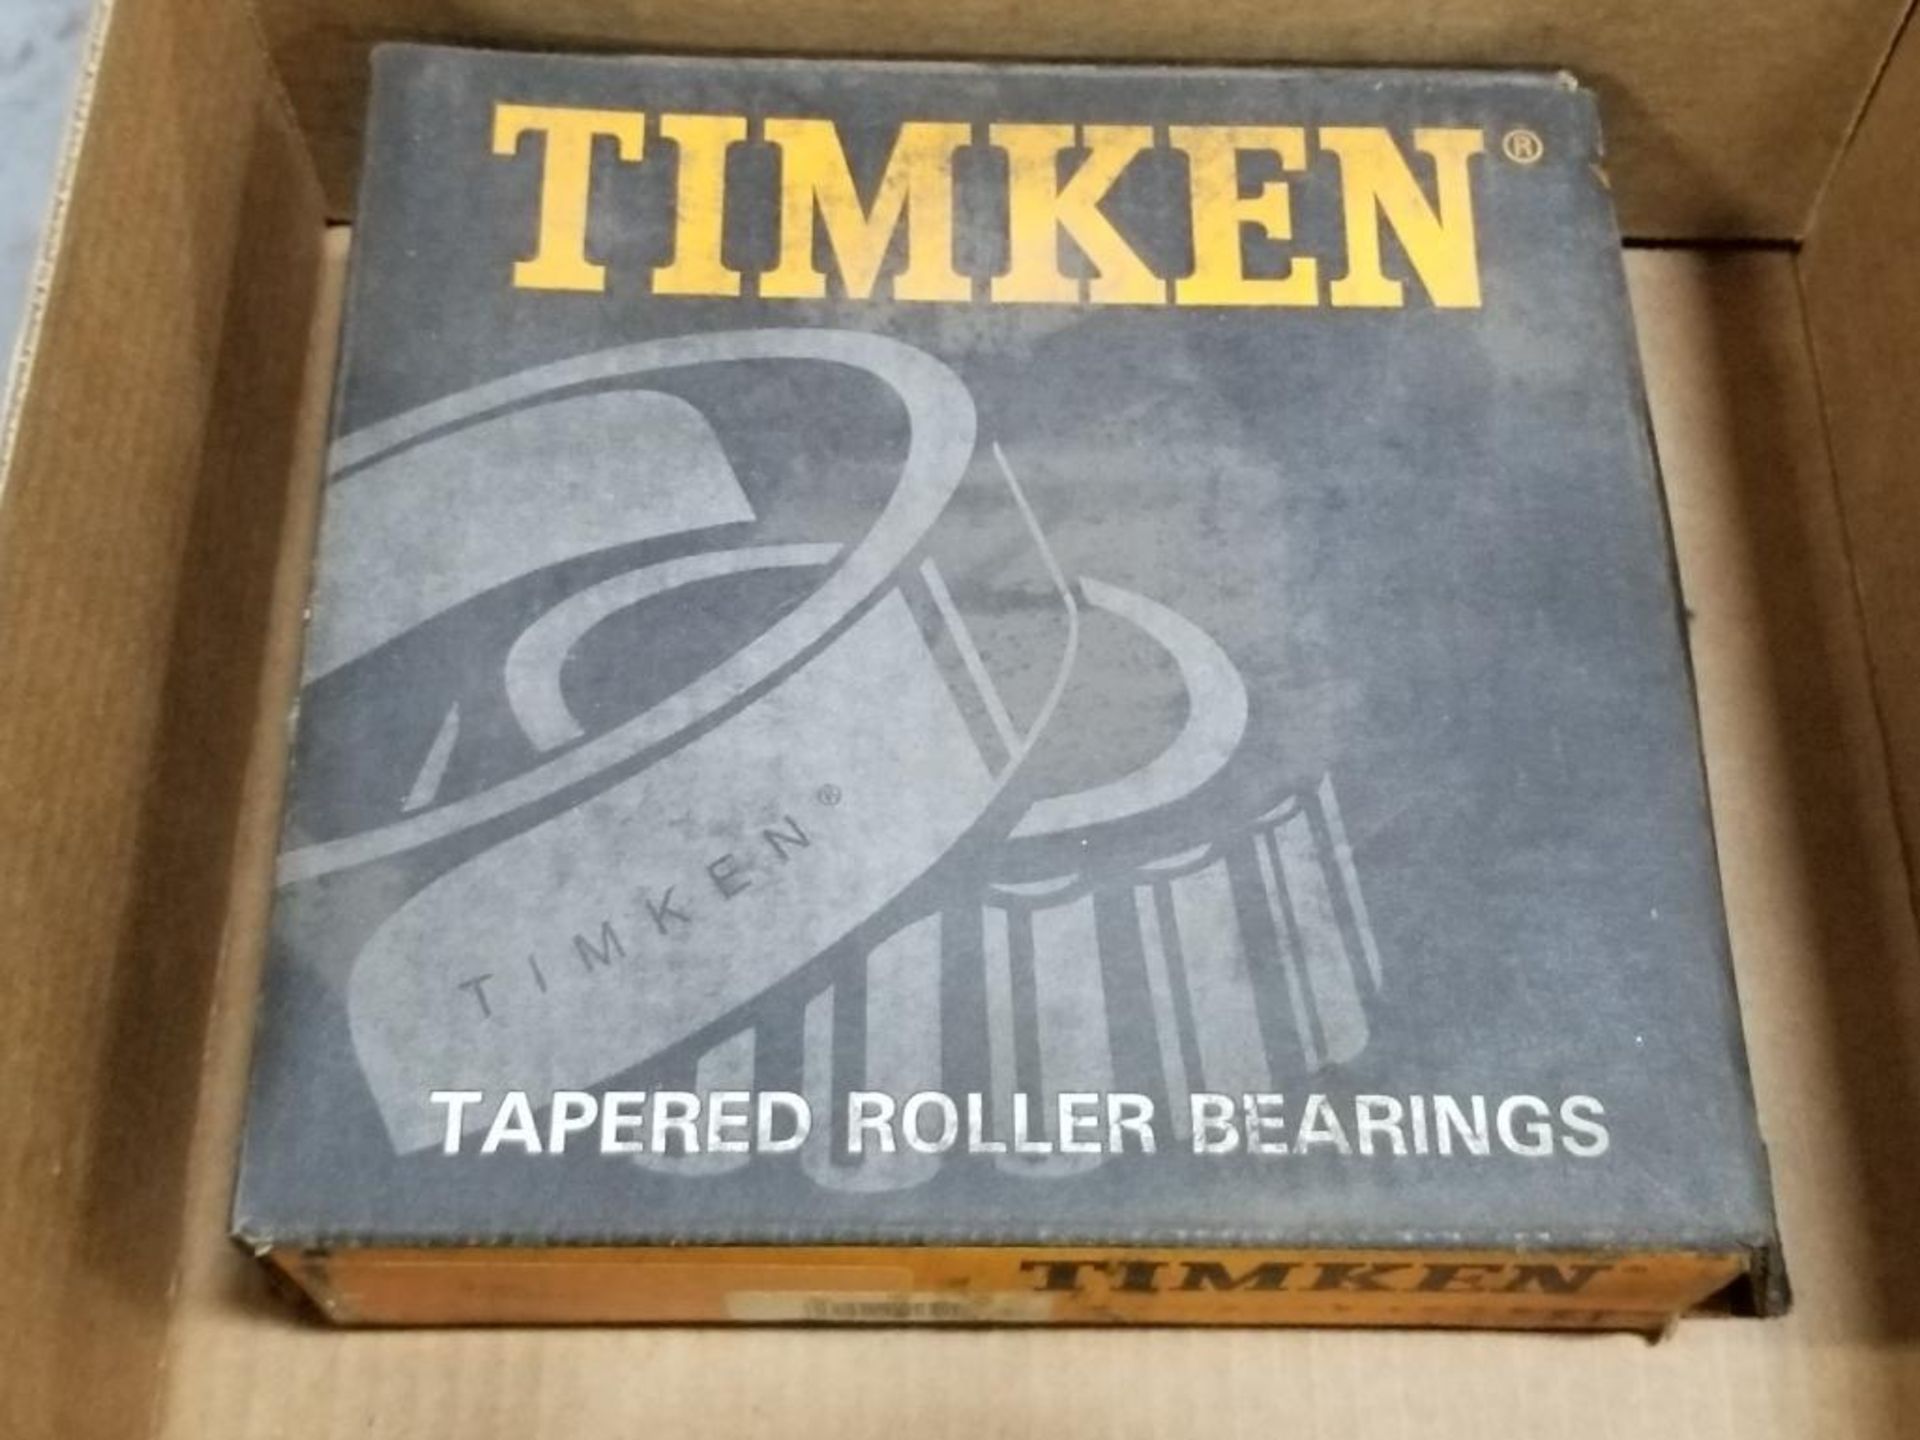 Qty 2 - Timken Bearings. Part number 752D and 795. - Image 4 of 5